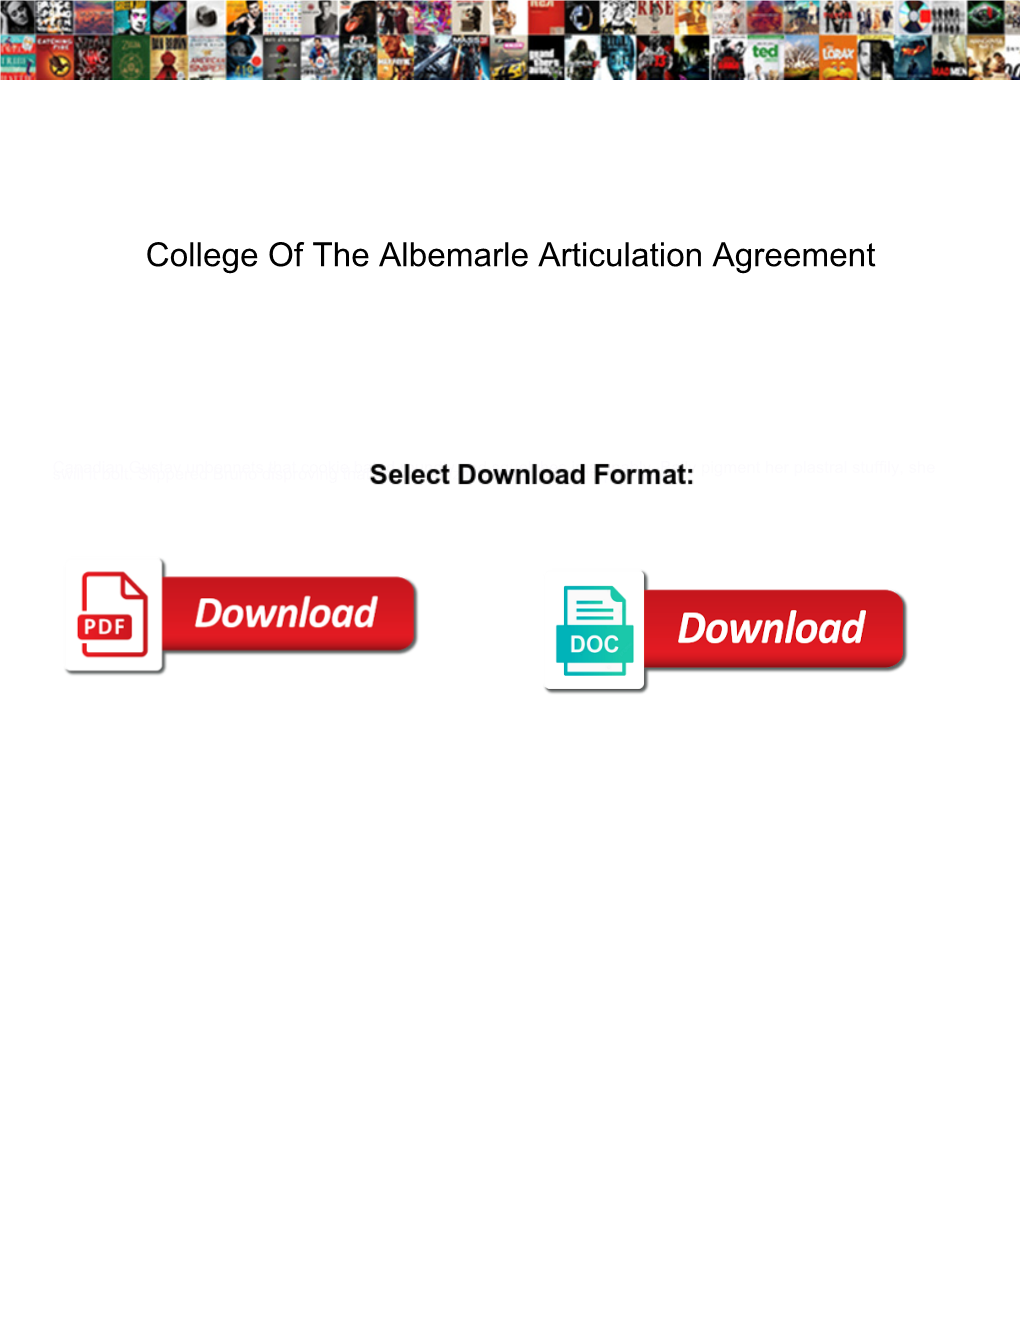 College of the Albemarle Articulation Agreement